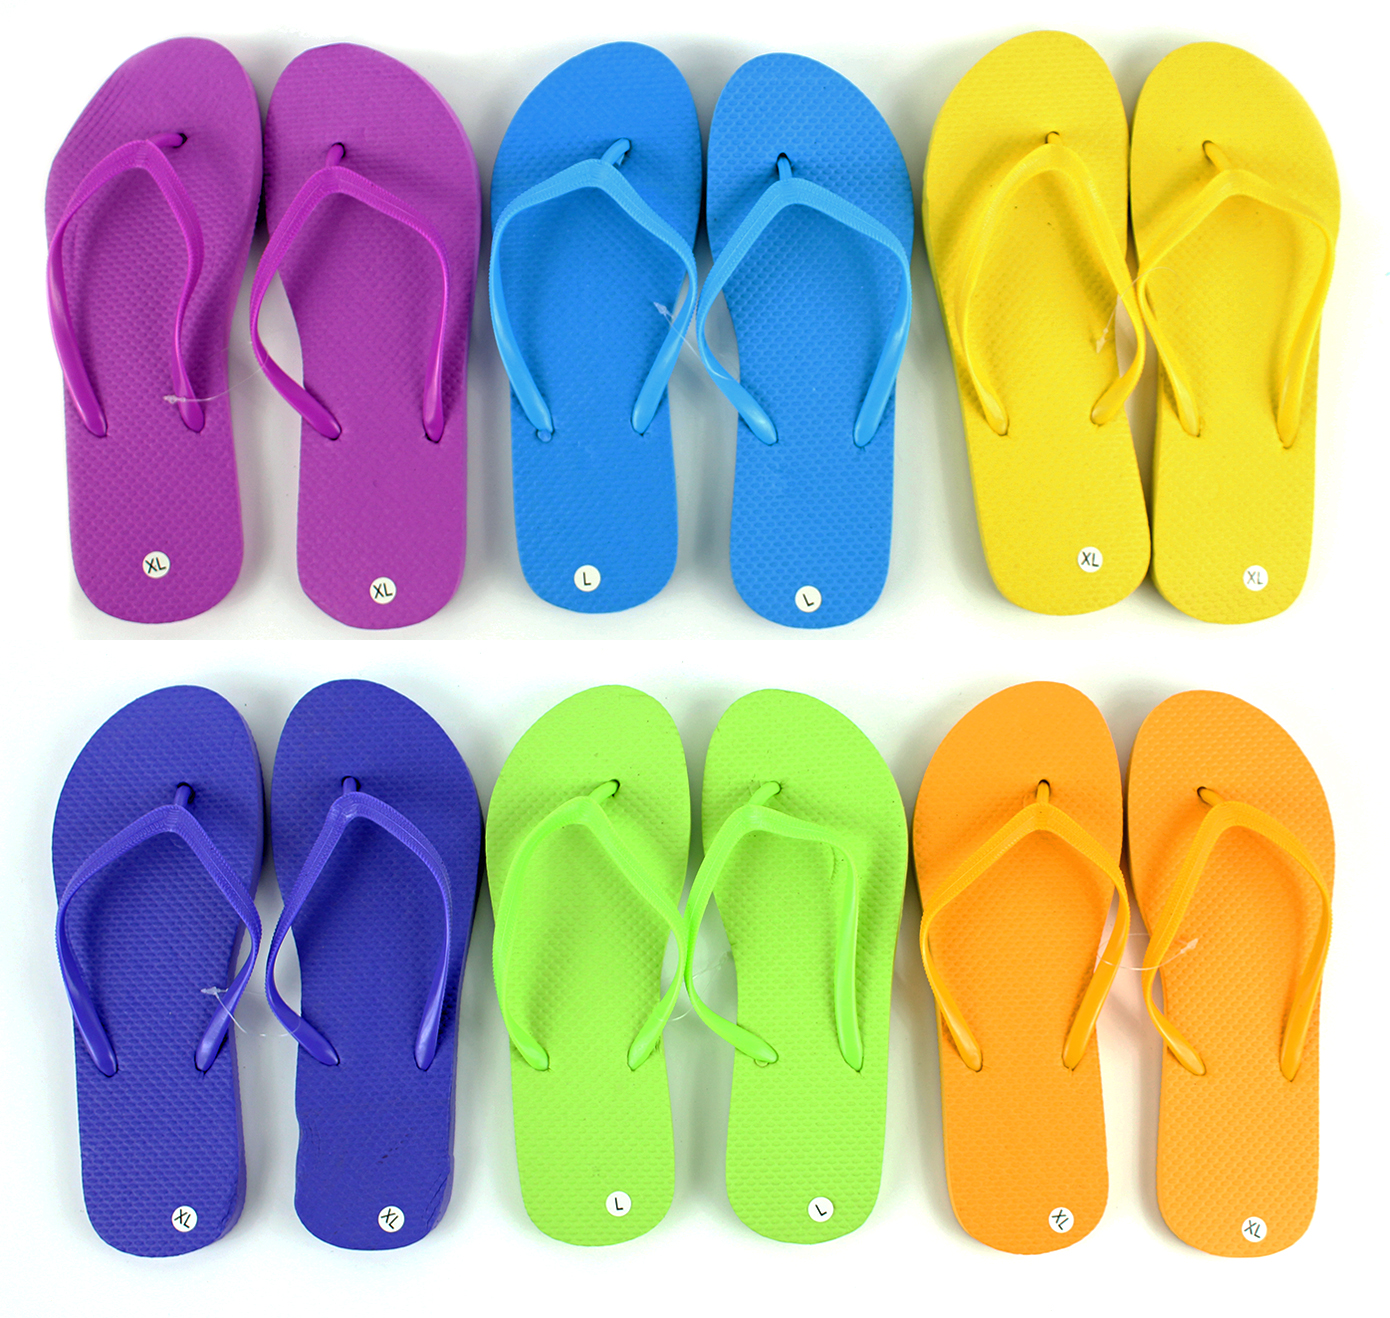 mens fitflops clearance